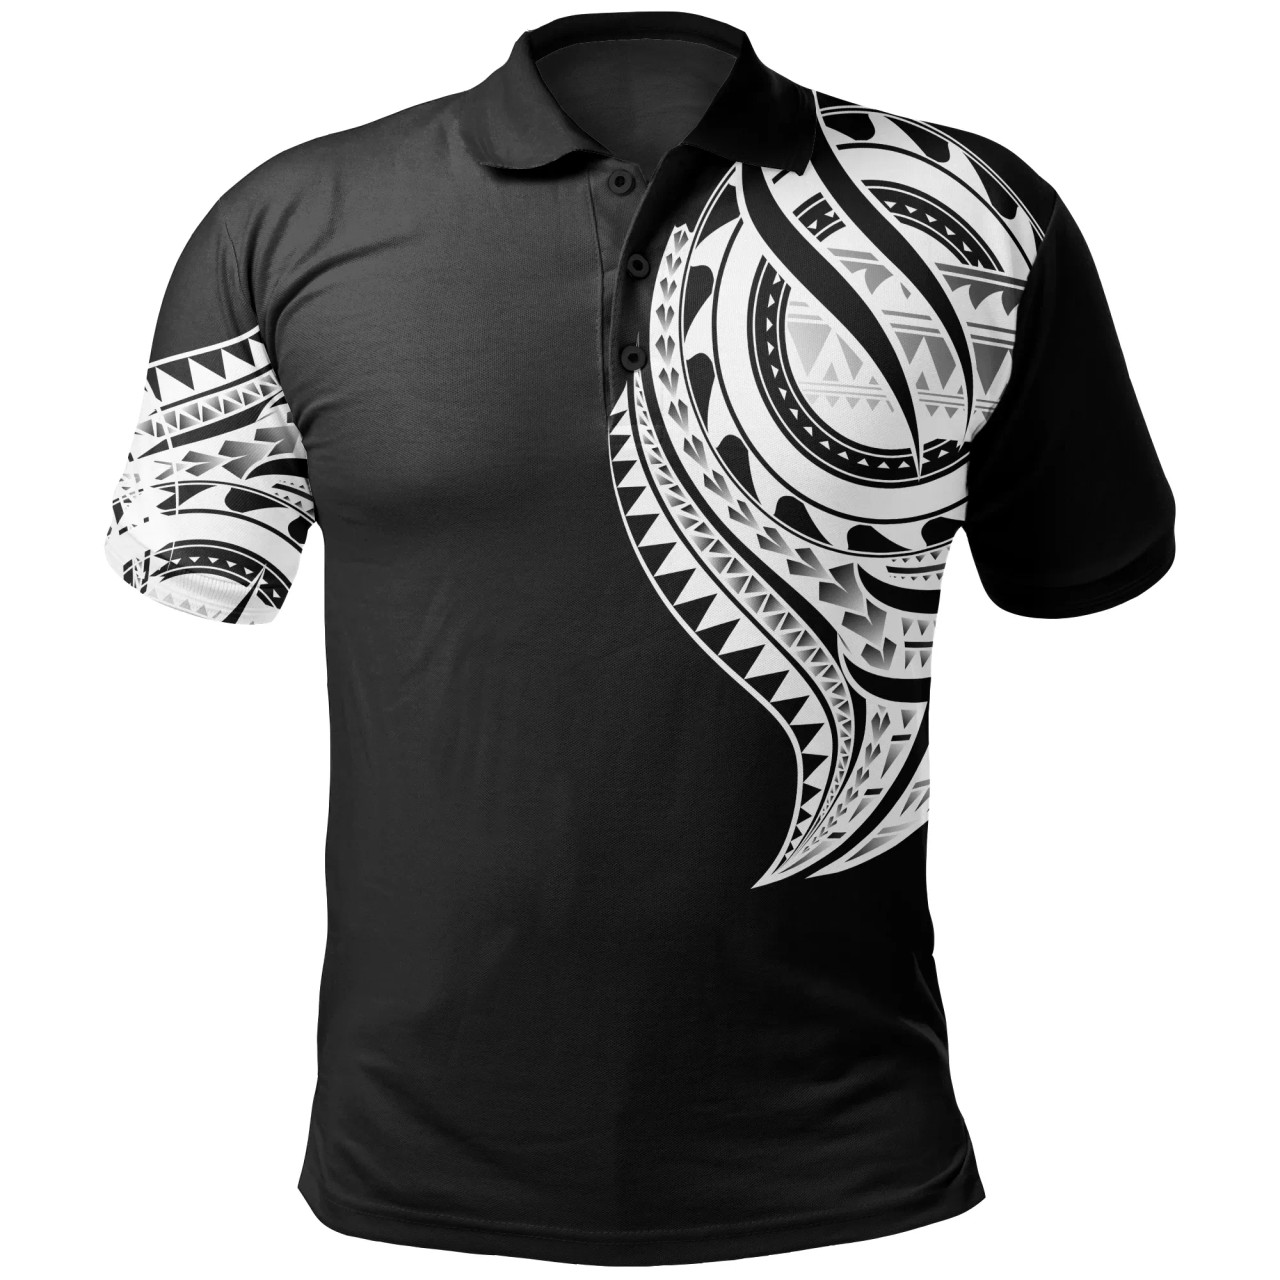 Yap State Polo Shirt - Yap State Tatau White Patterns With Coat Of Arms 1